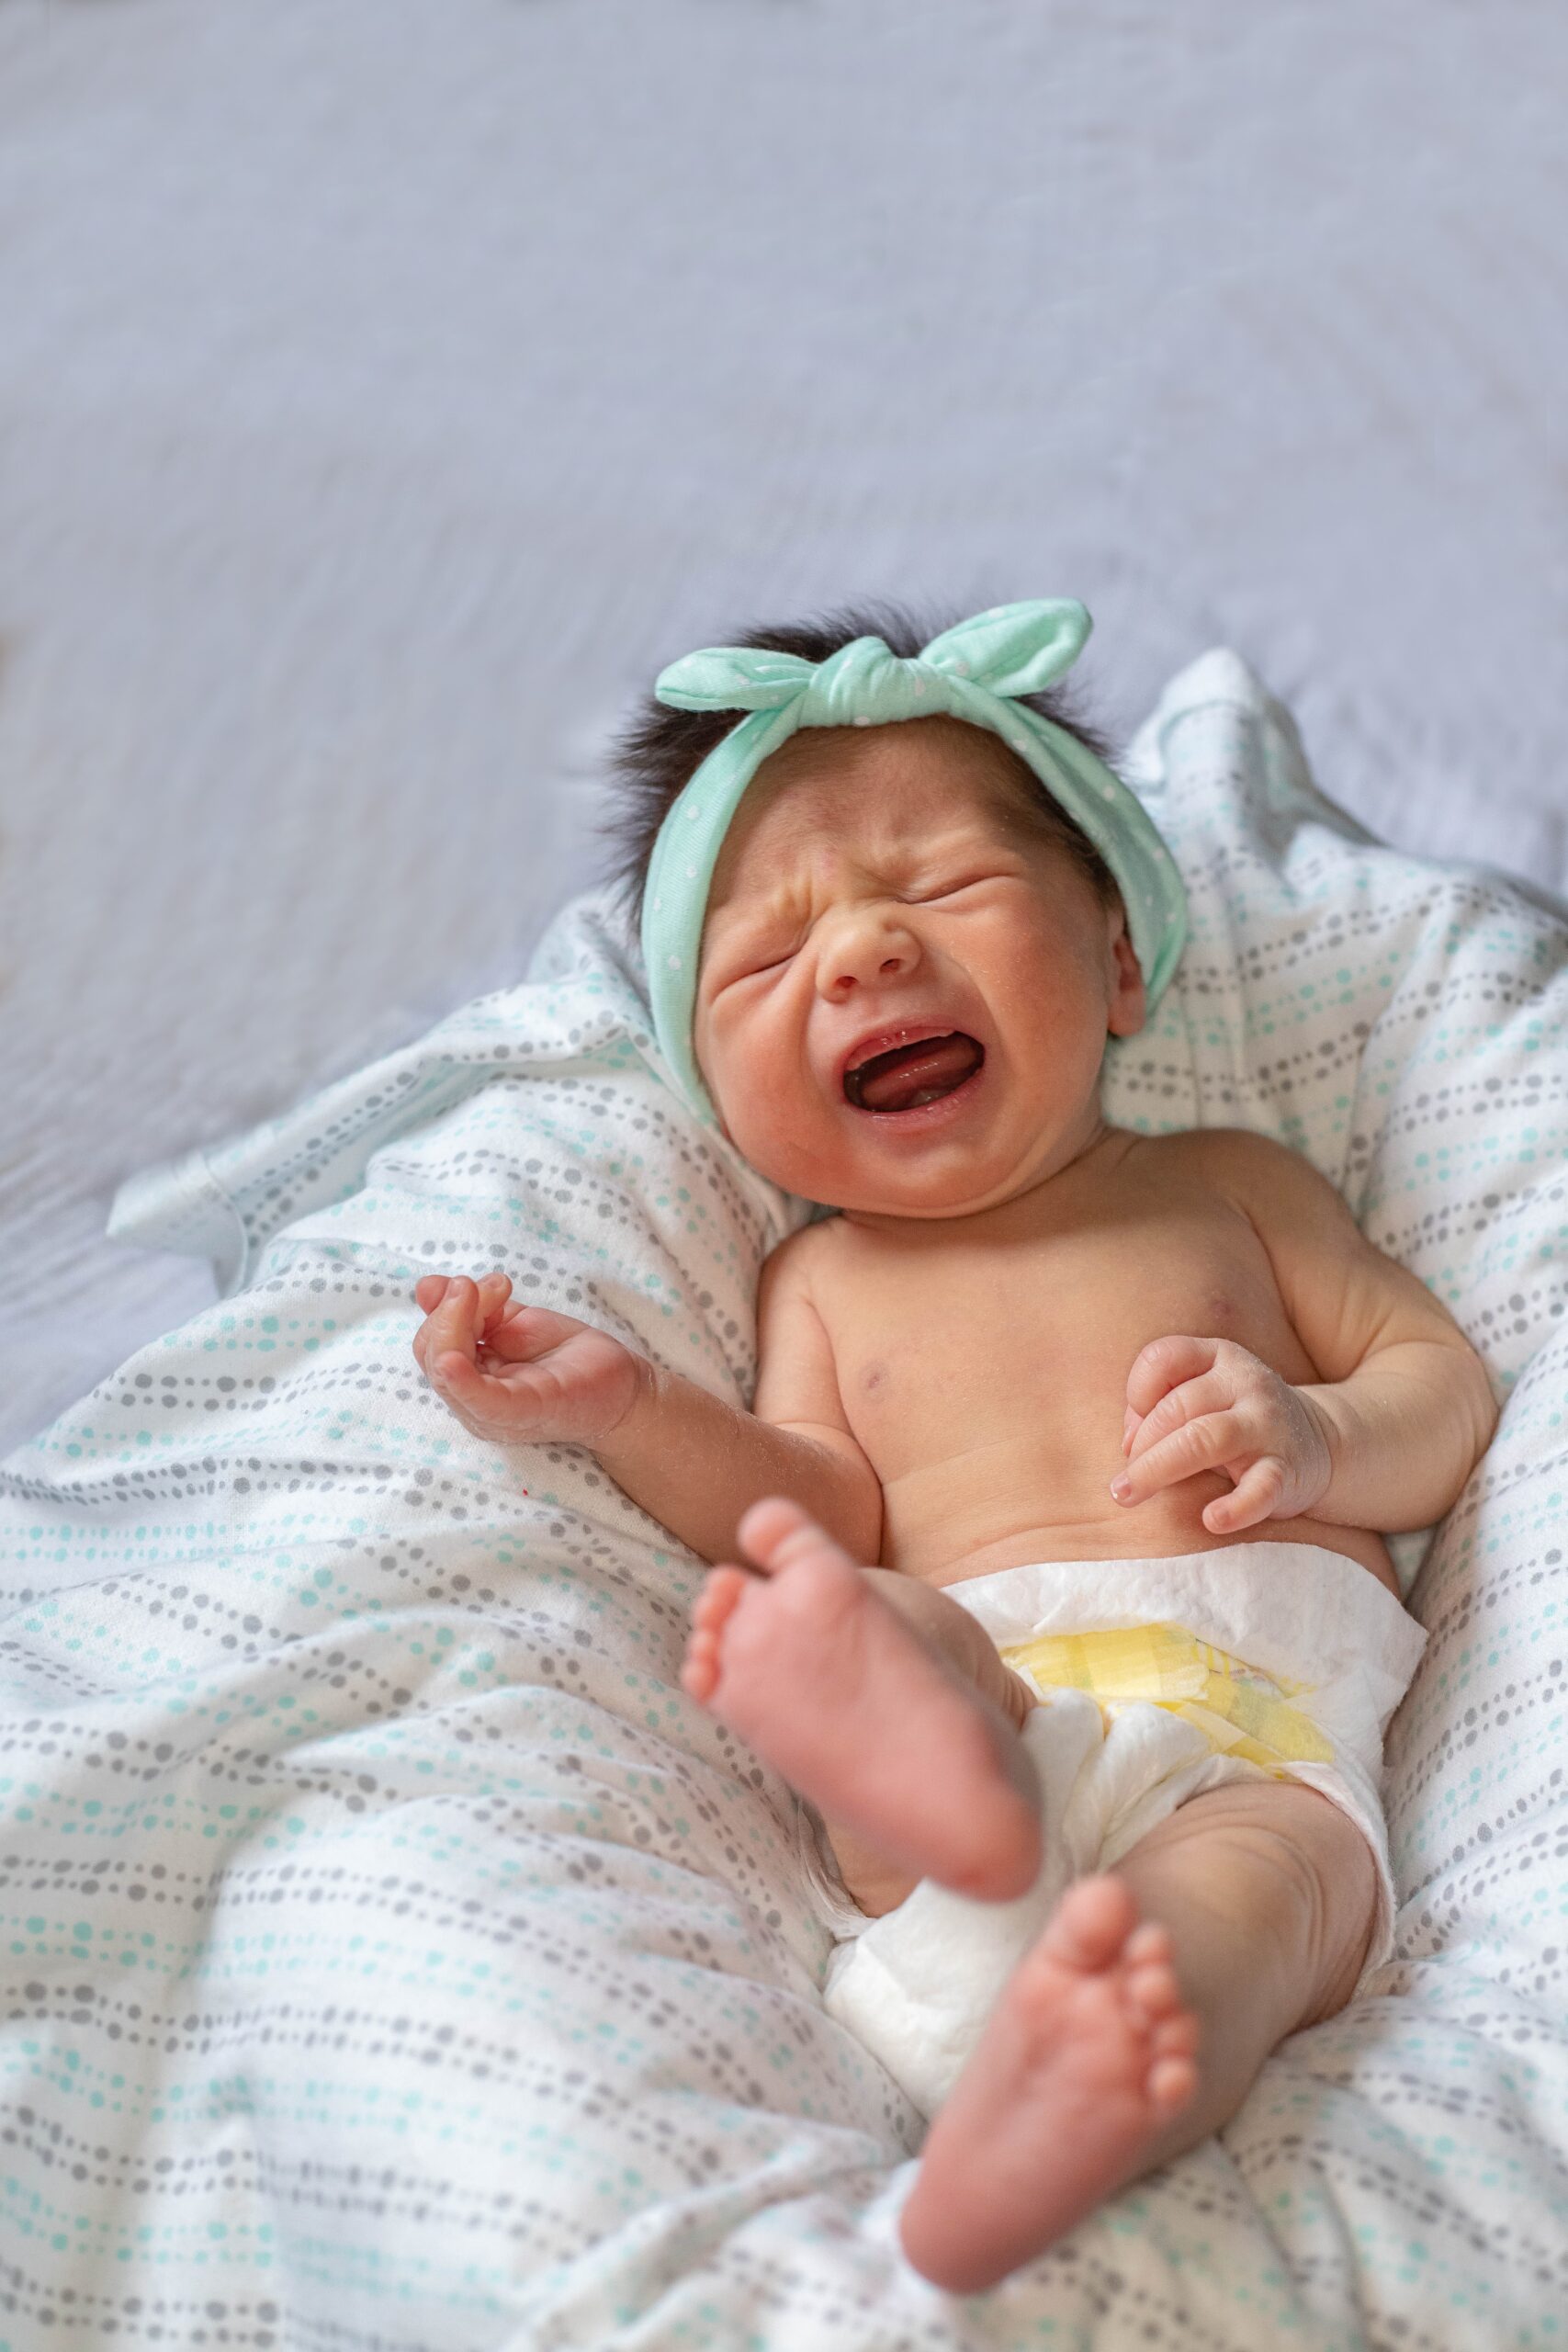 A baby crying - HealthMed.org